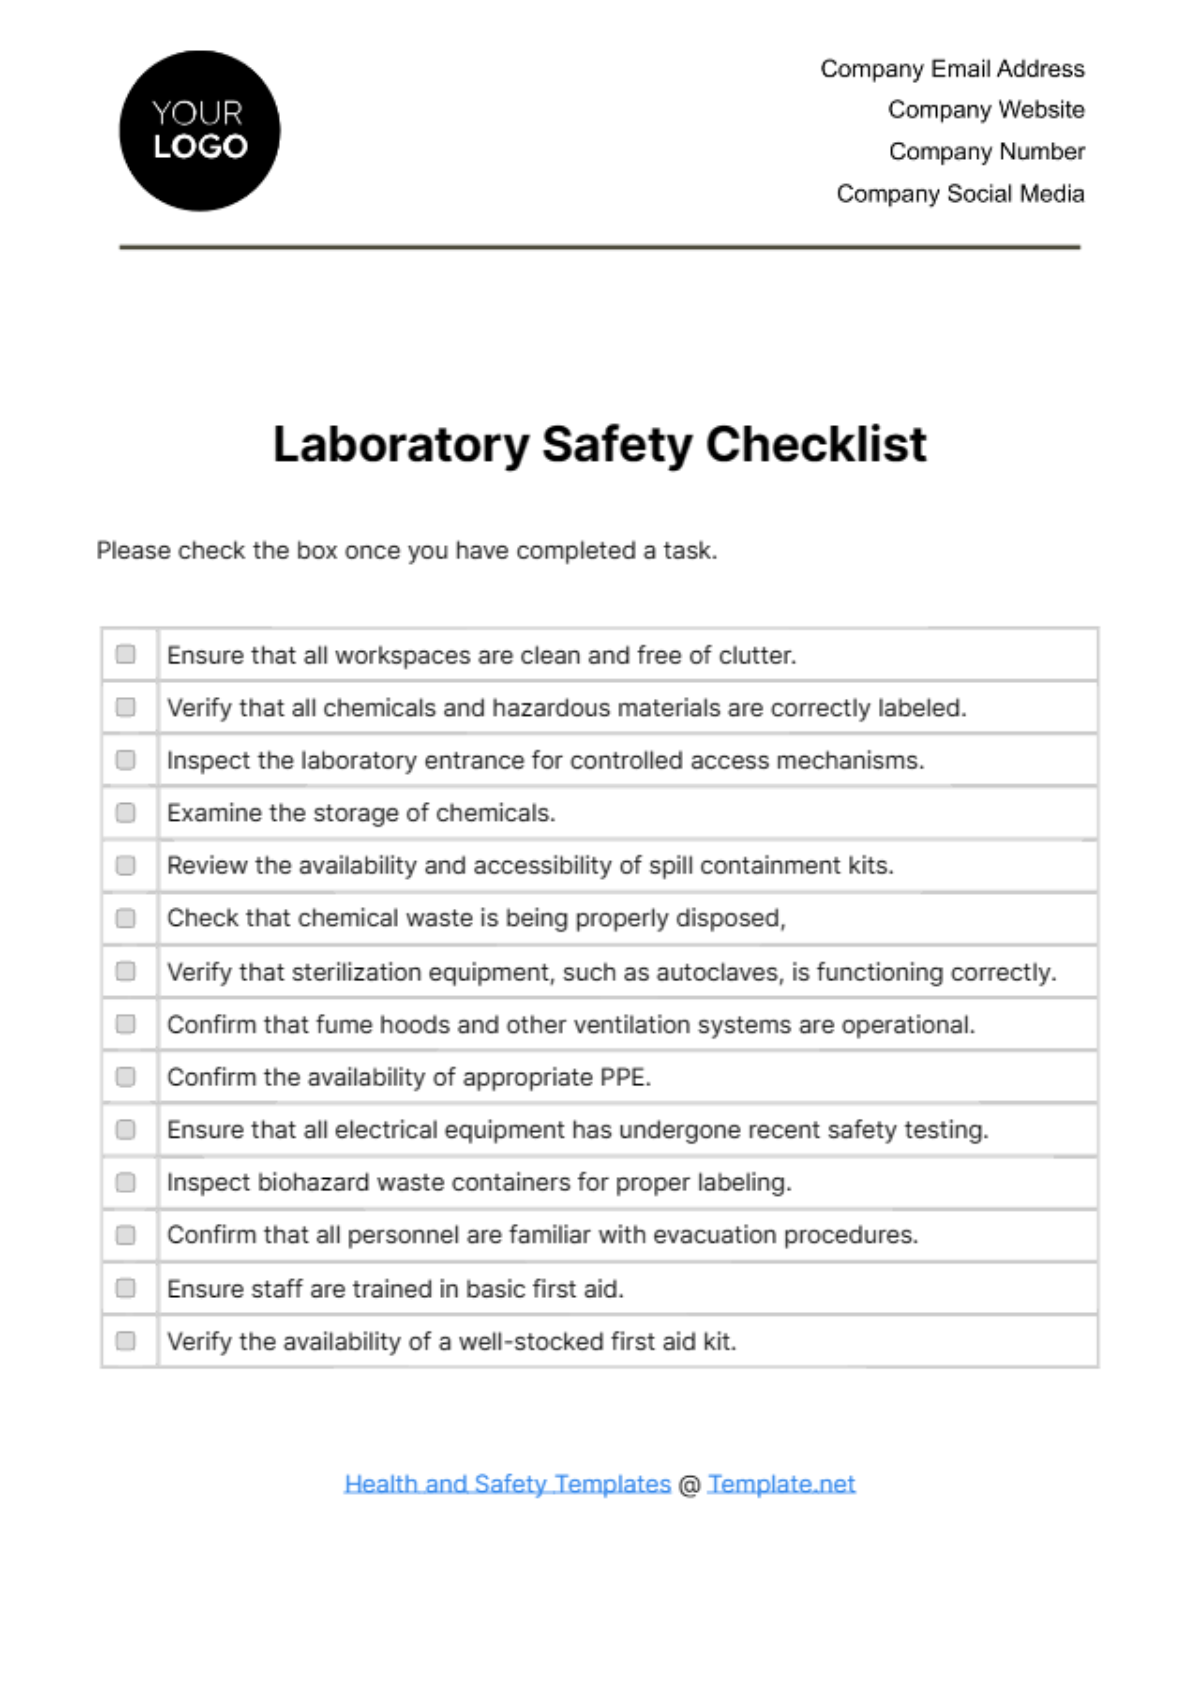 Free Laboratory Safety Checklist Template